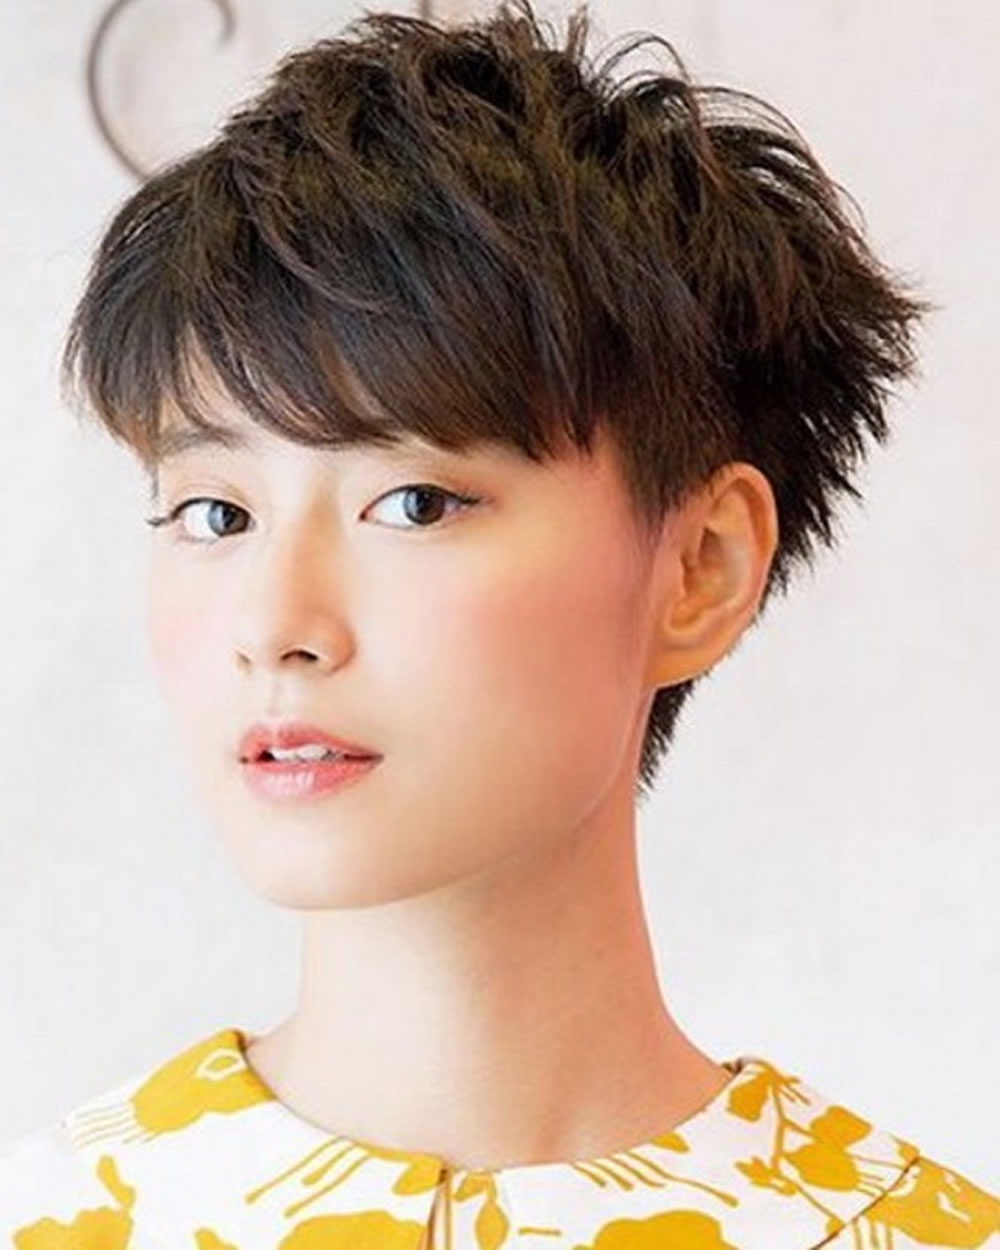 Pixie Haircuts For Asian Women | 18 Best Short Hairstyle Ideas 2018 inside Superb Asian Short Hairstyles 2019 Female